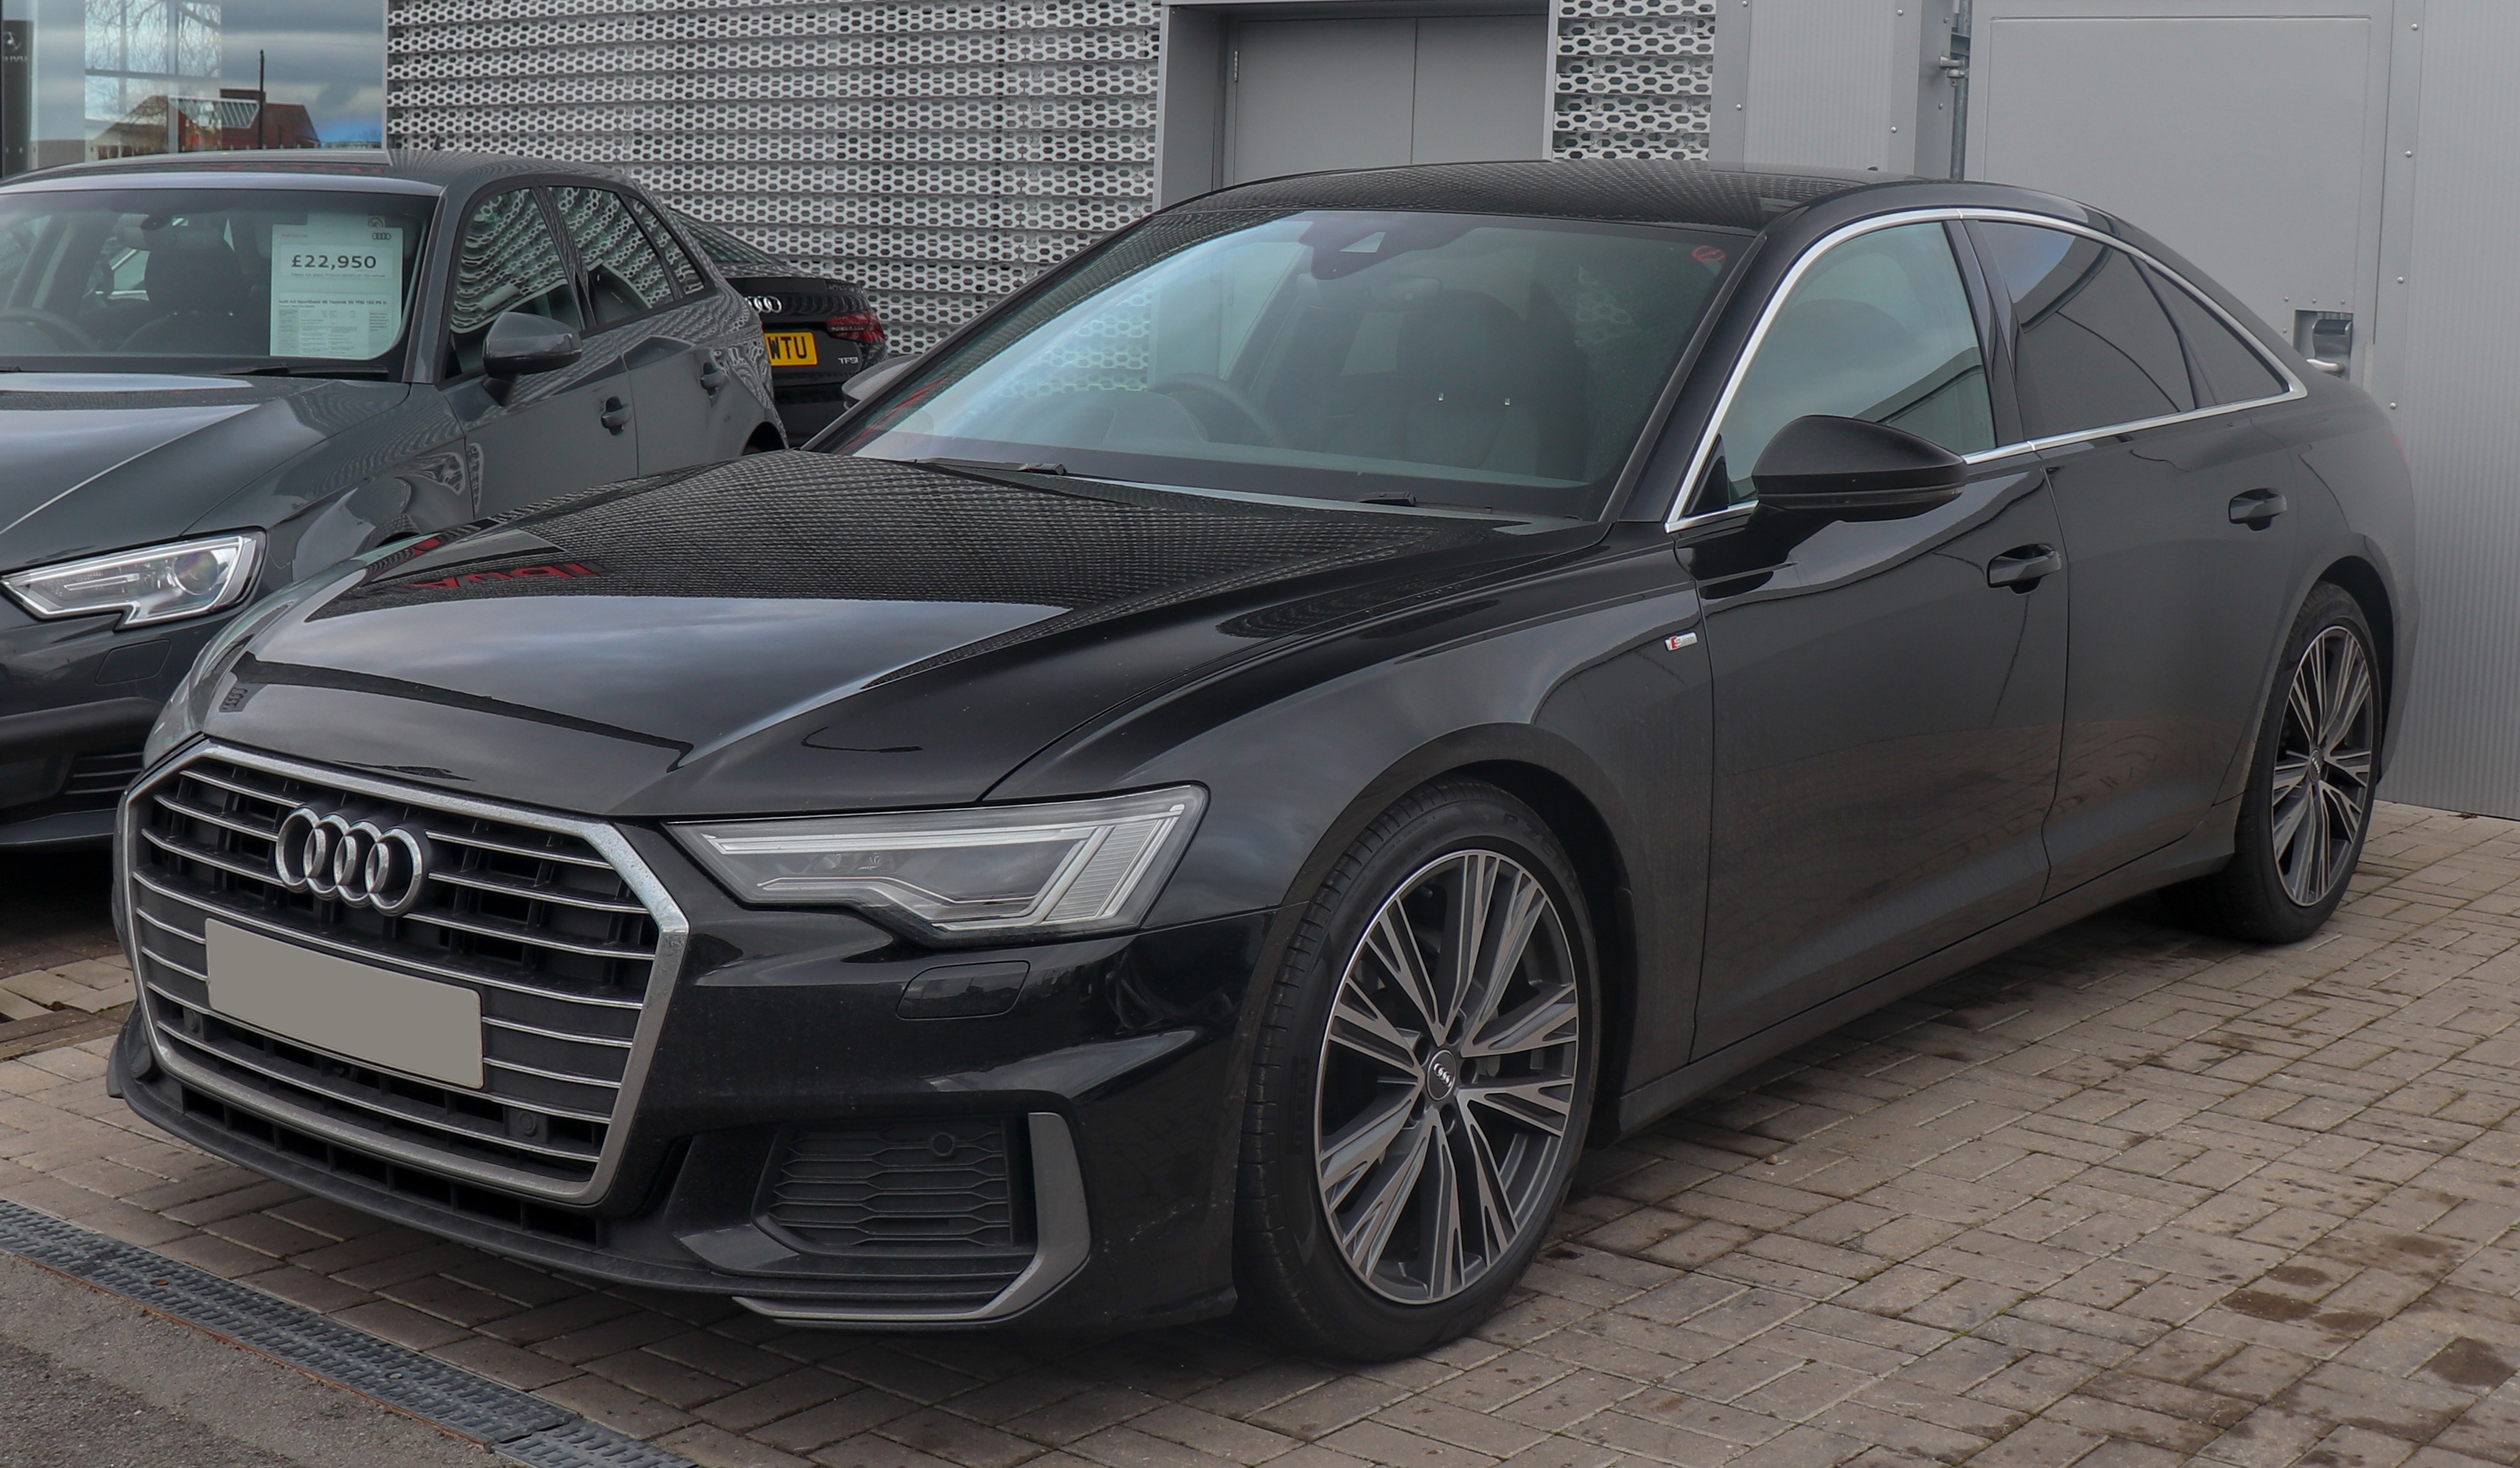 Audi S7 Sportback accessories specifications